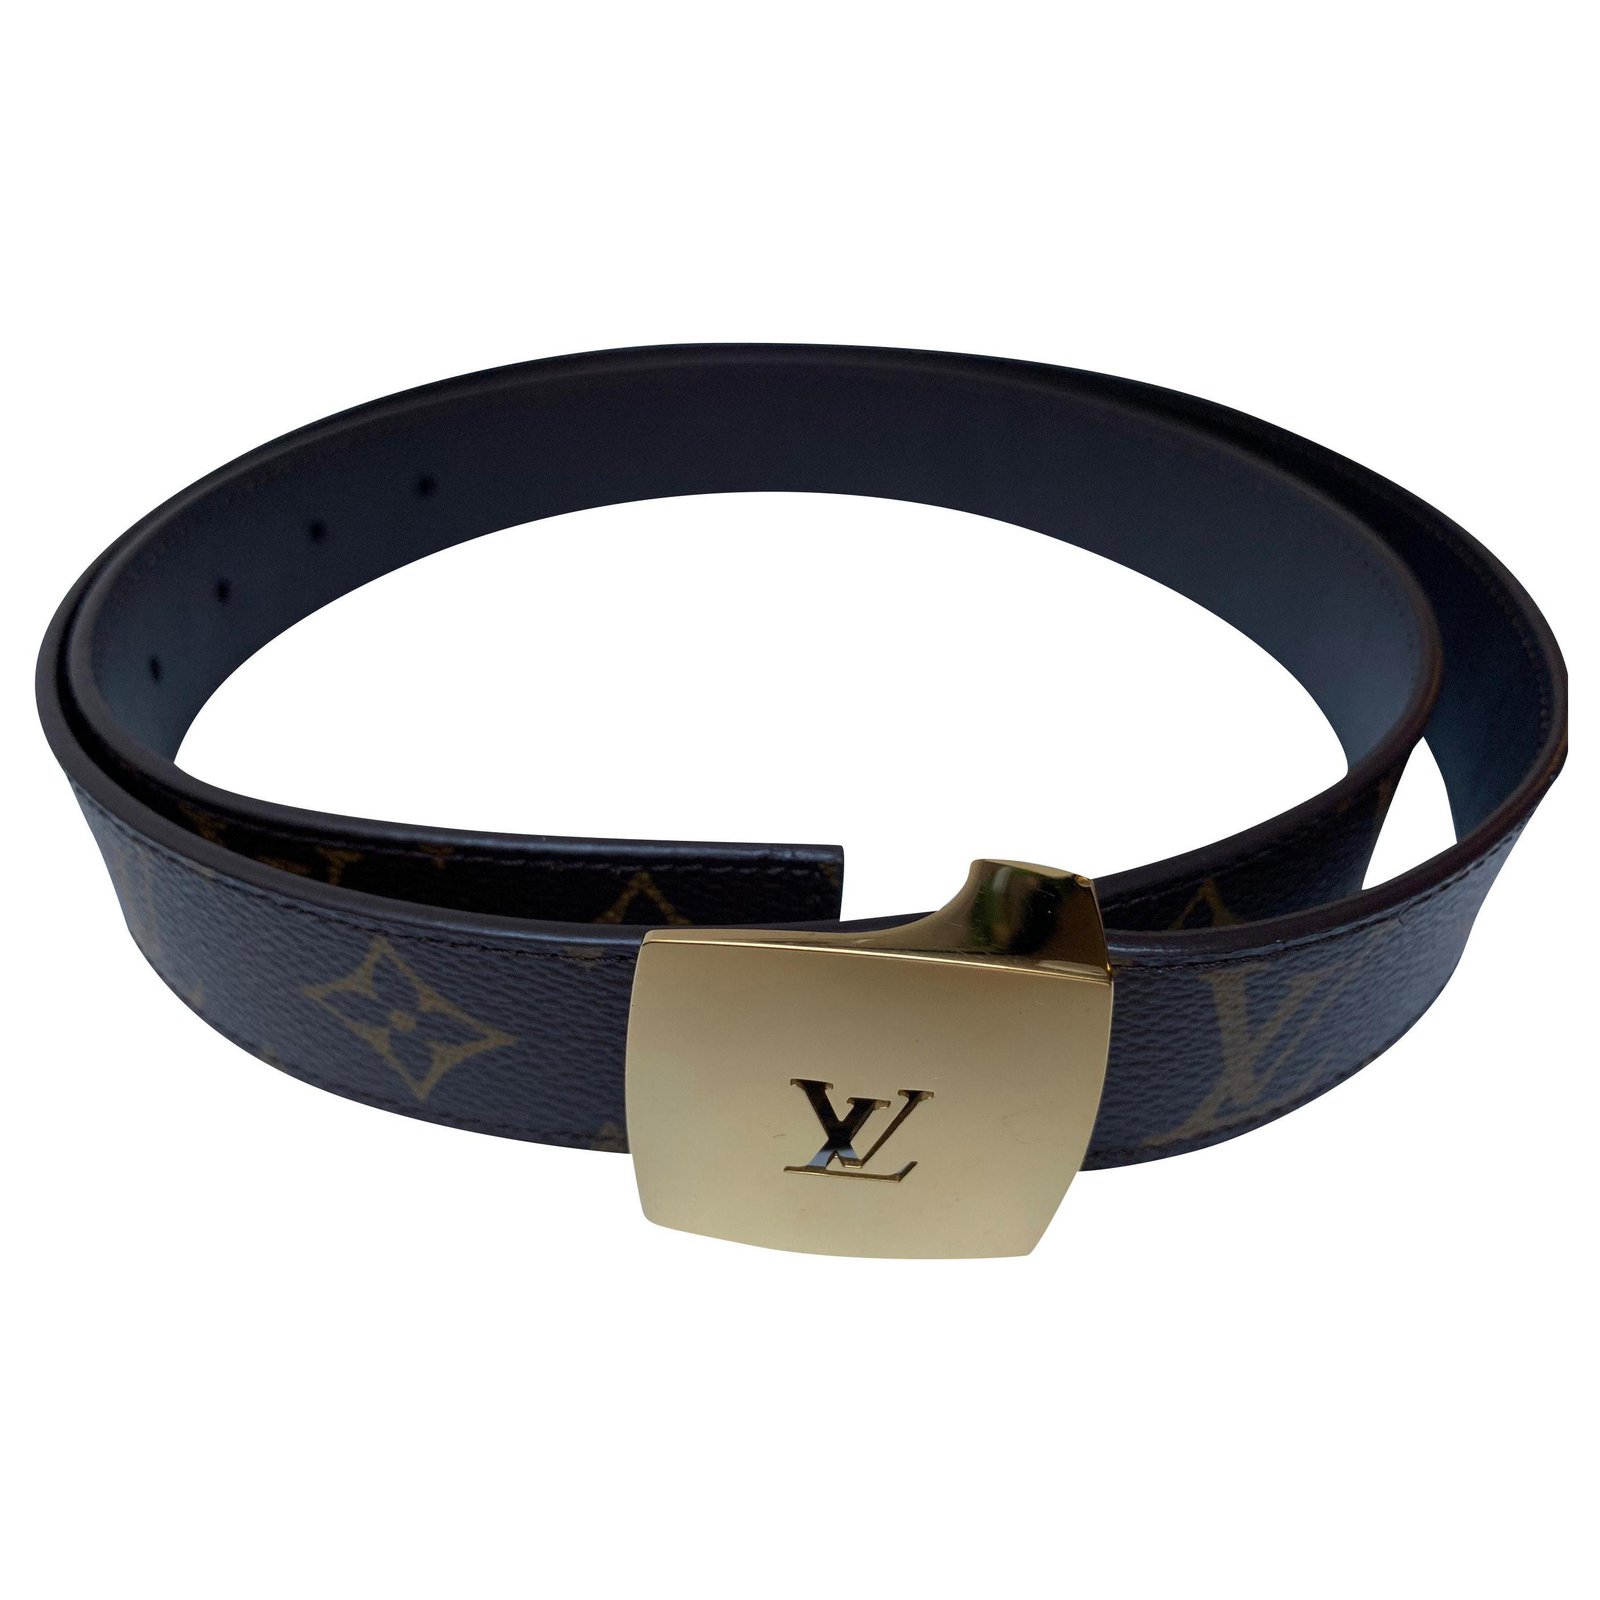 An Ultimate Guide to LV Belt Men’s: Styling Tips and Fashion Trends